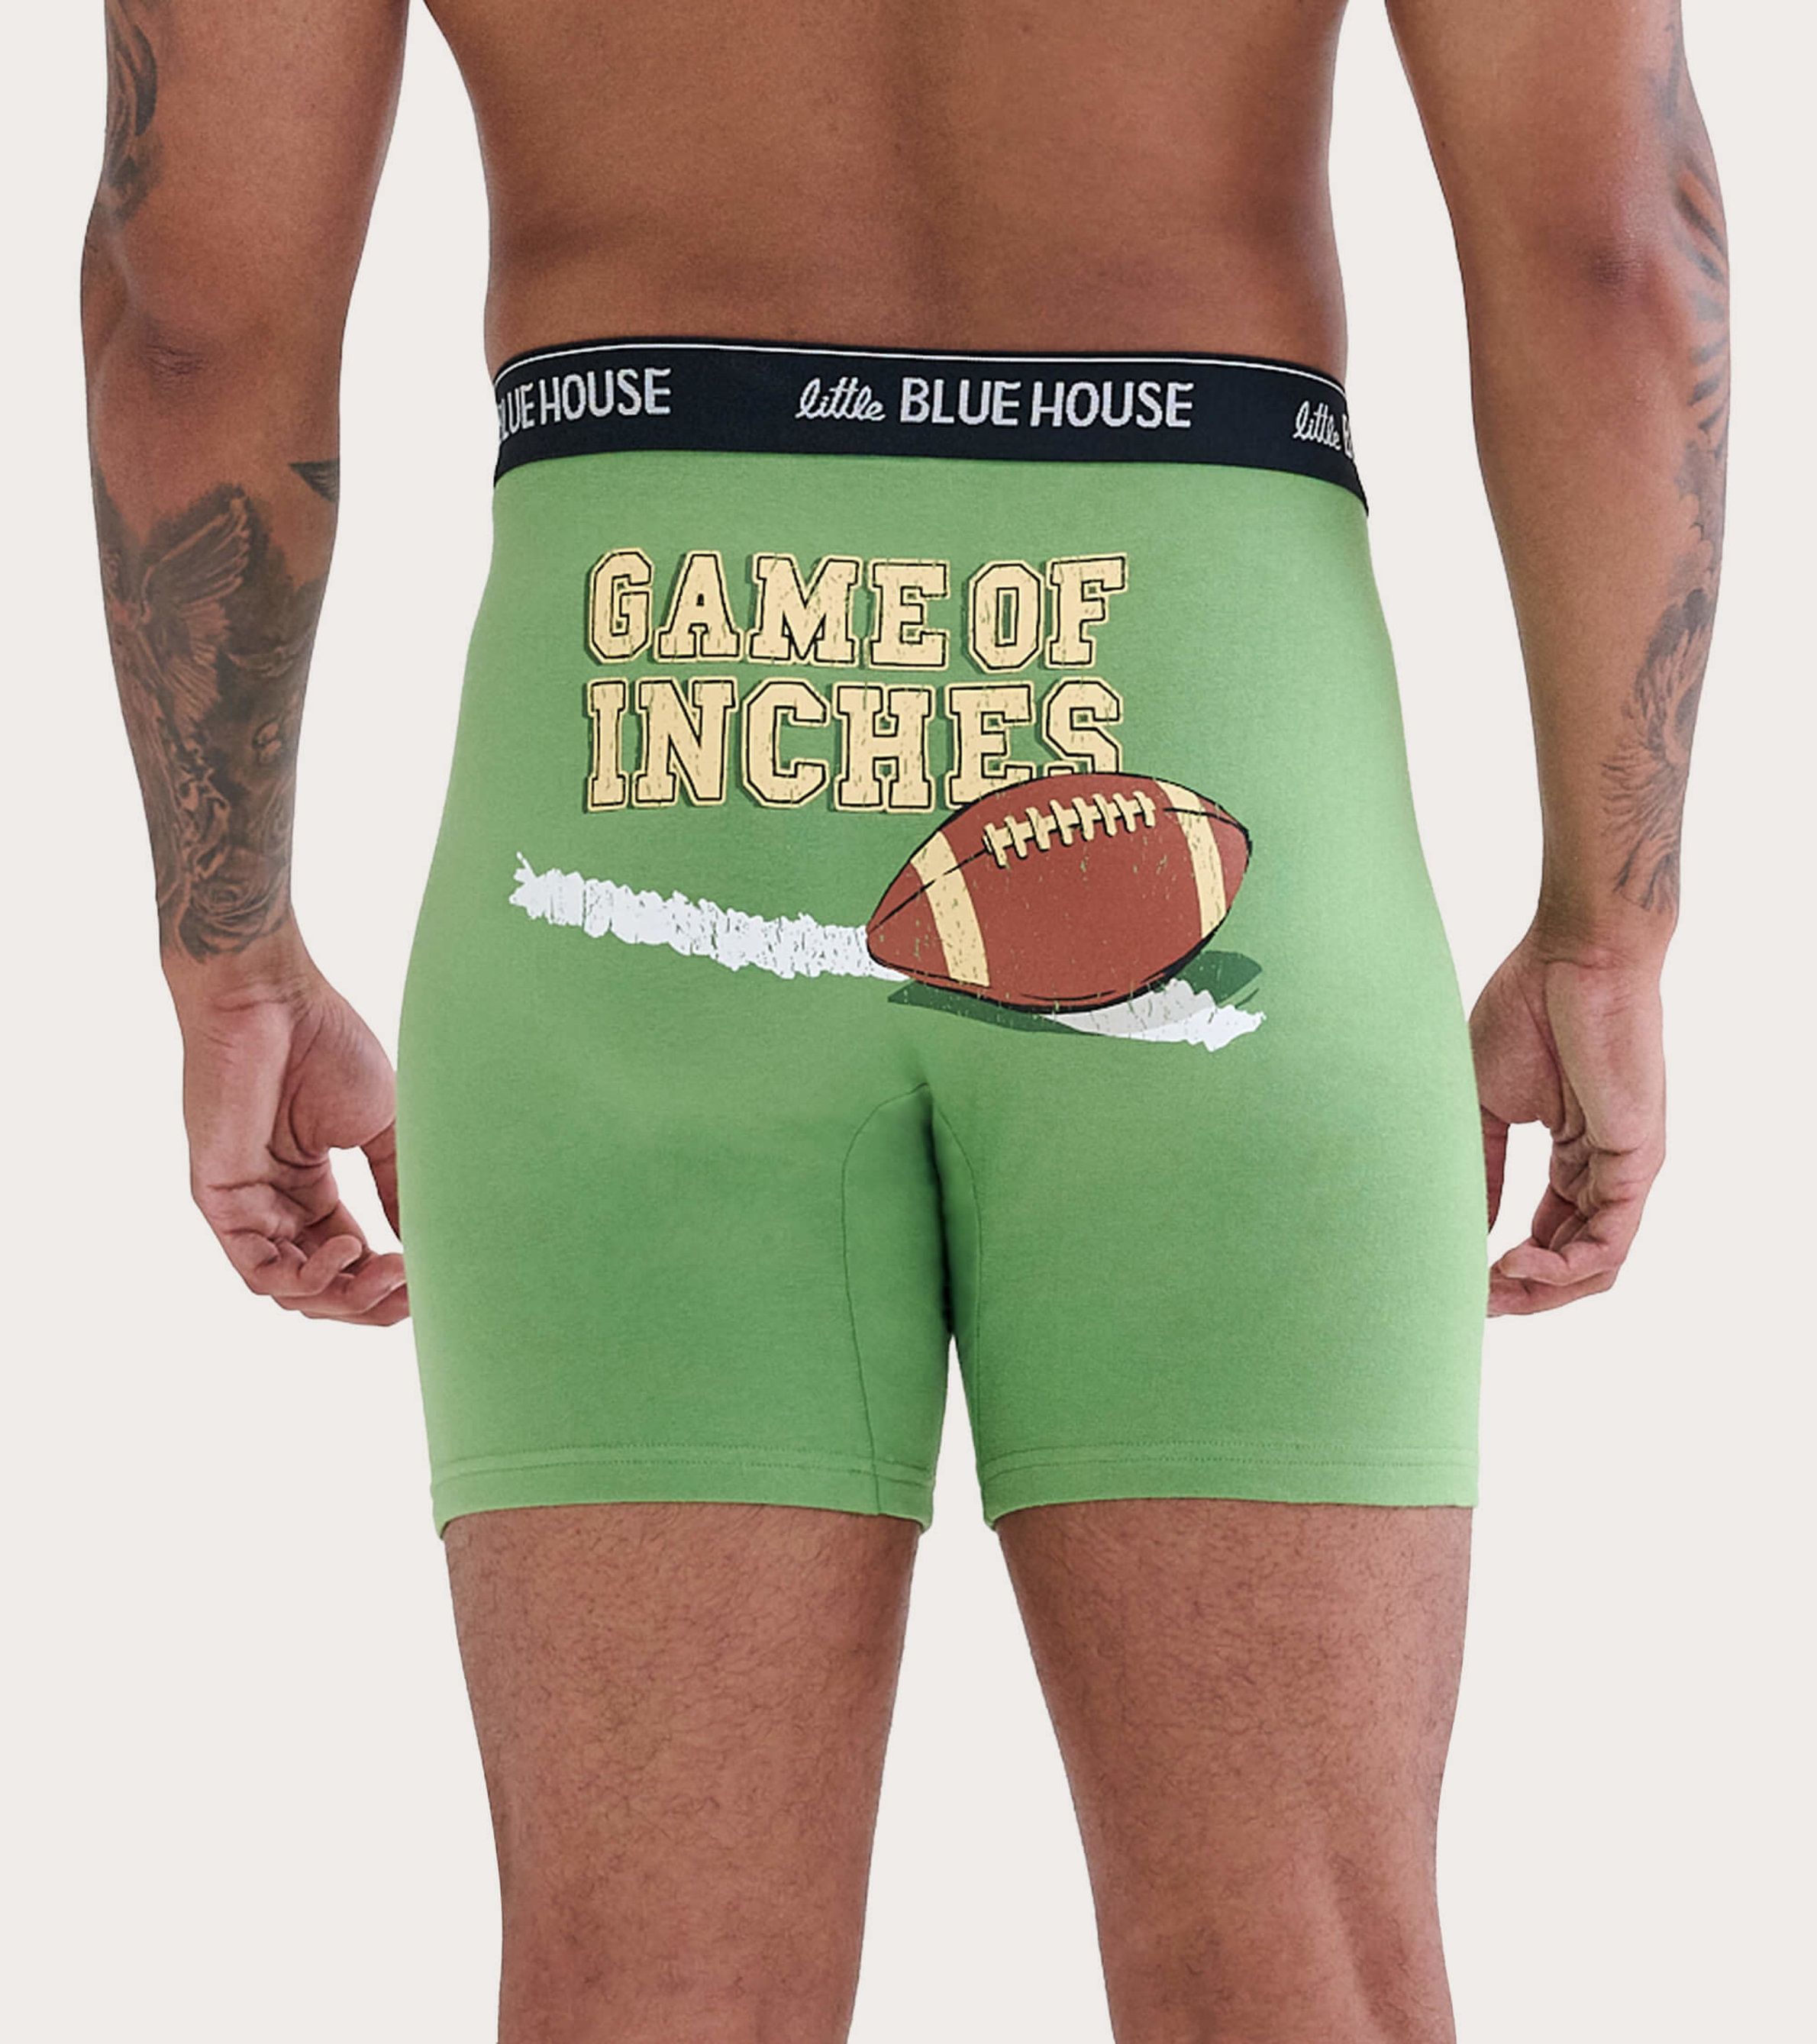 https://cdn.littlebluehouse.com/product_images/game-of-inches-mens-boxer-brief/BXCGAME004_jpg/pdp_zoom.jpg?c=1678383177&locale=us_en